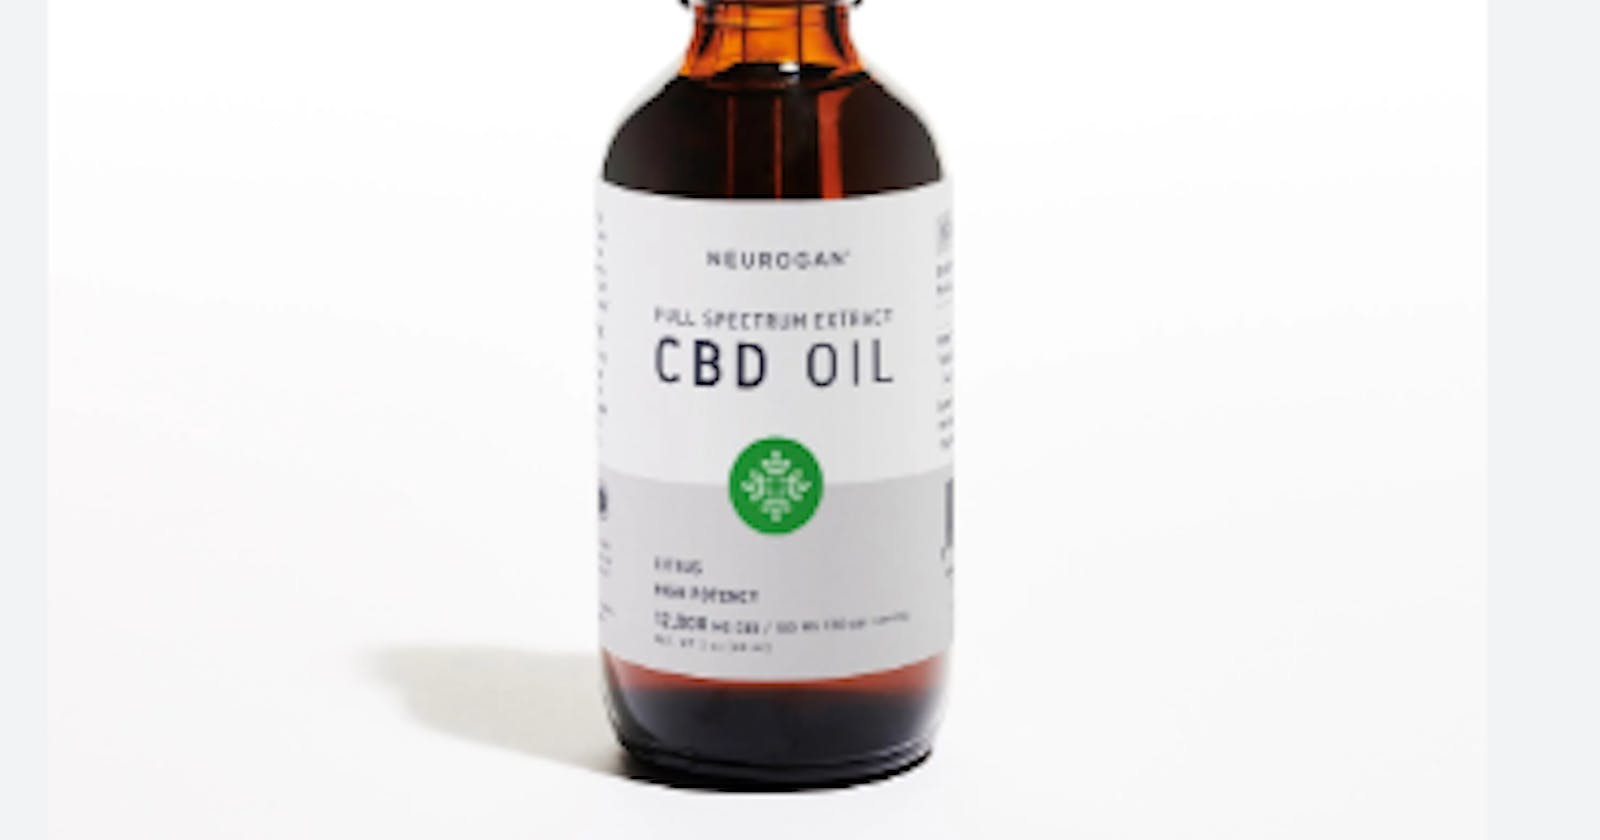 What Is CBD Oil? Uses, Benefits, Side Effects, and More